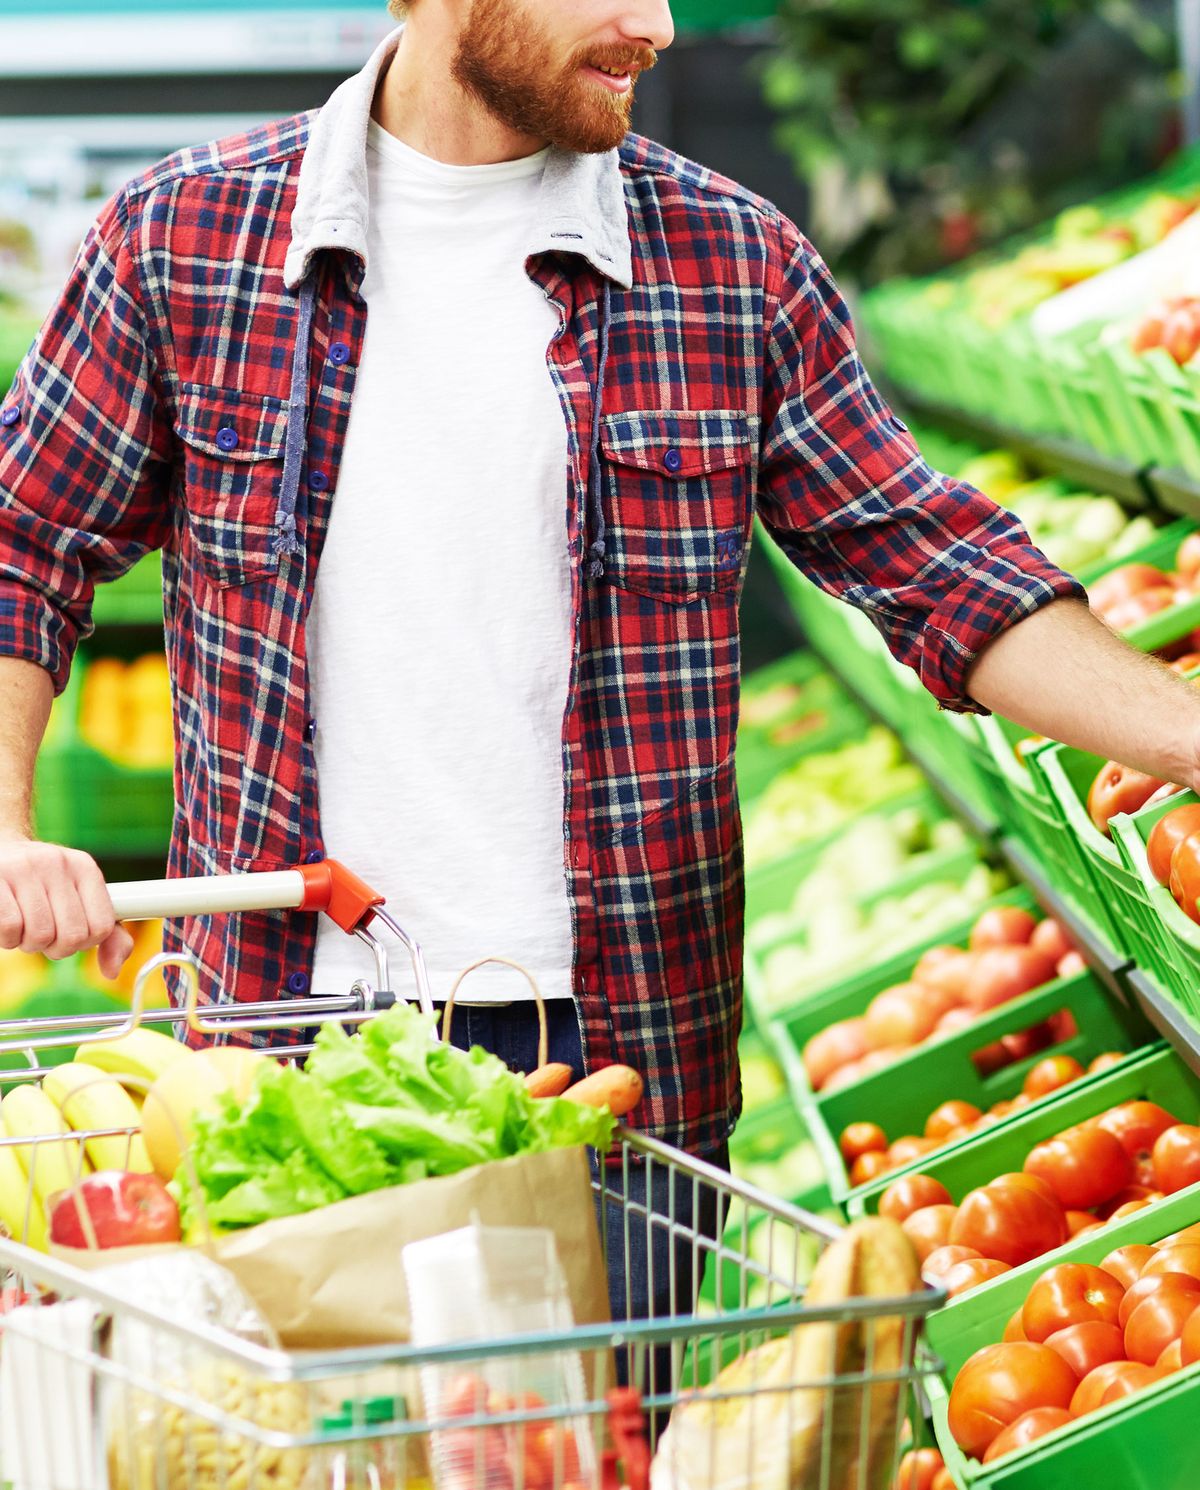 healthiest grocery stores